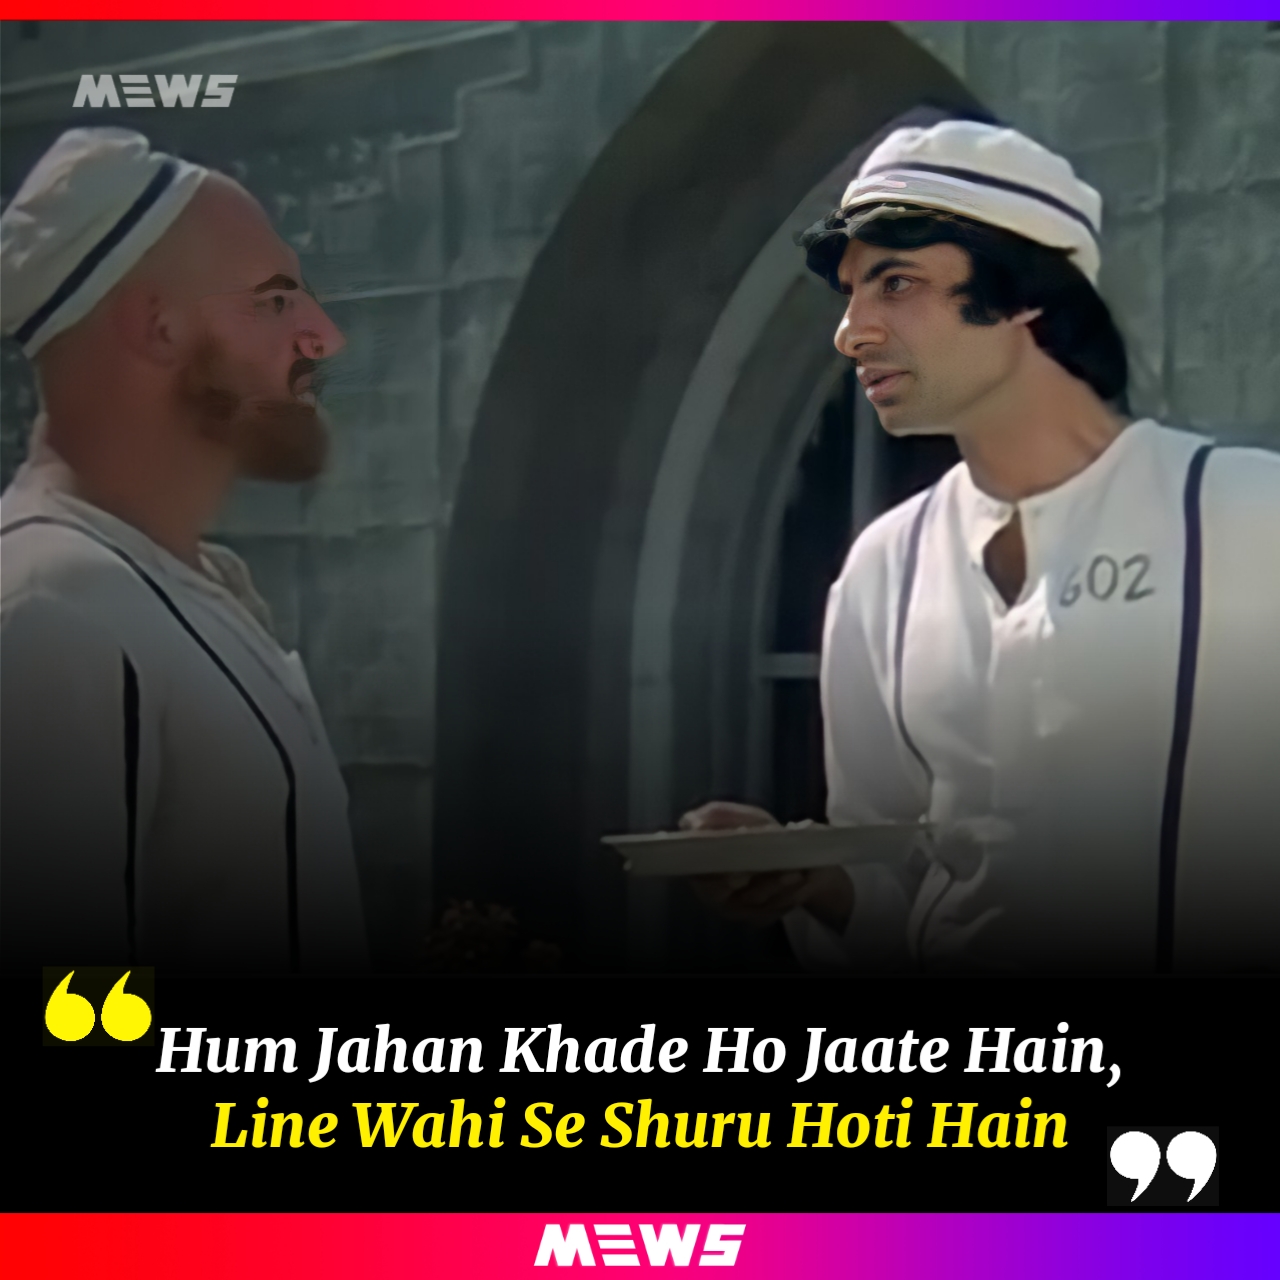 famous dialogues in Bollywood